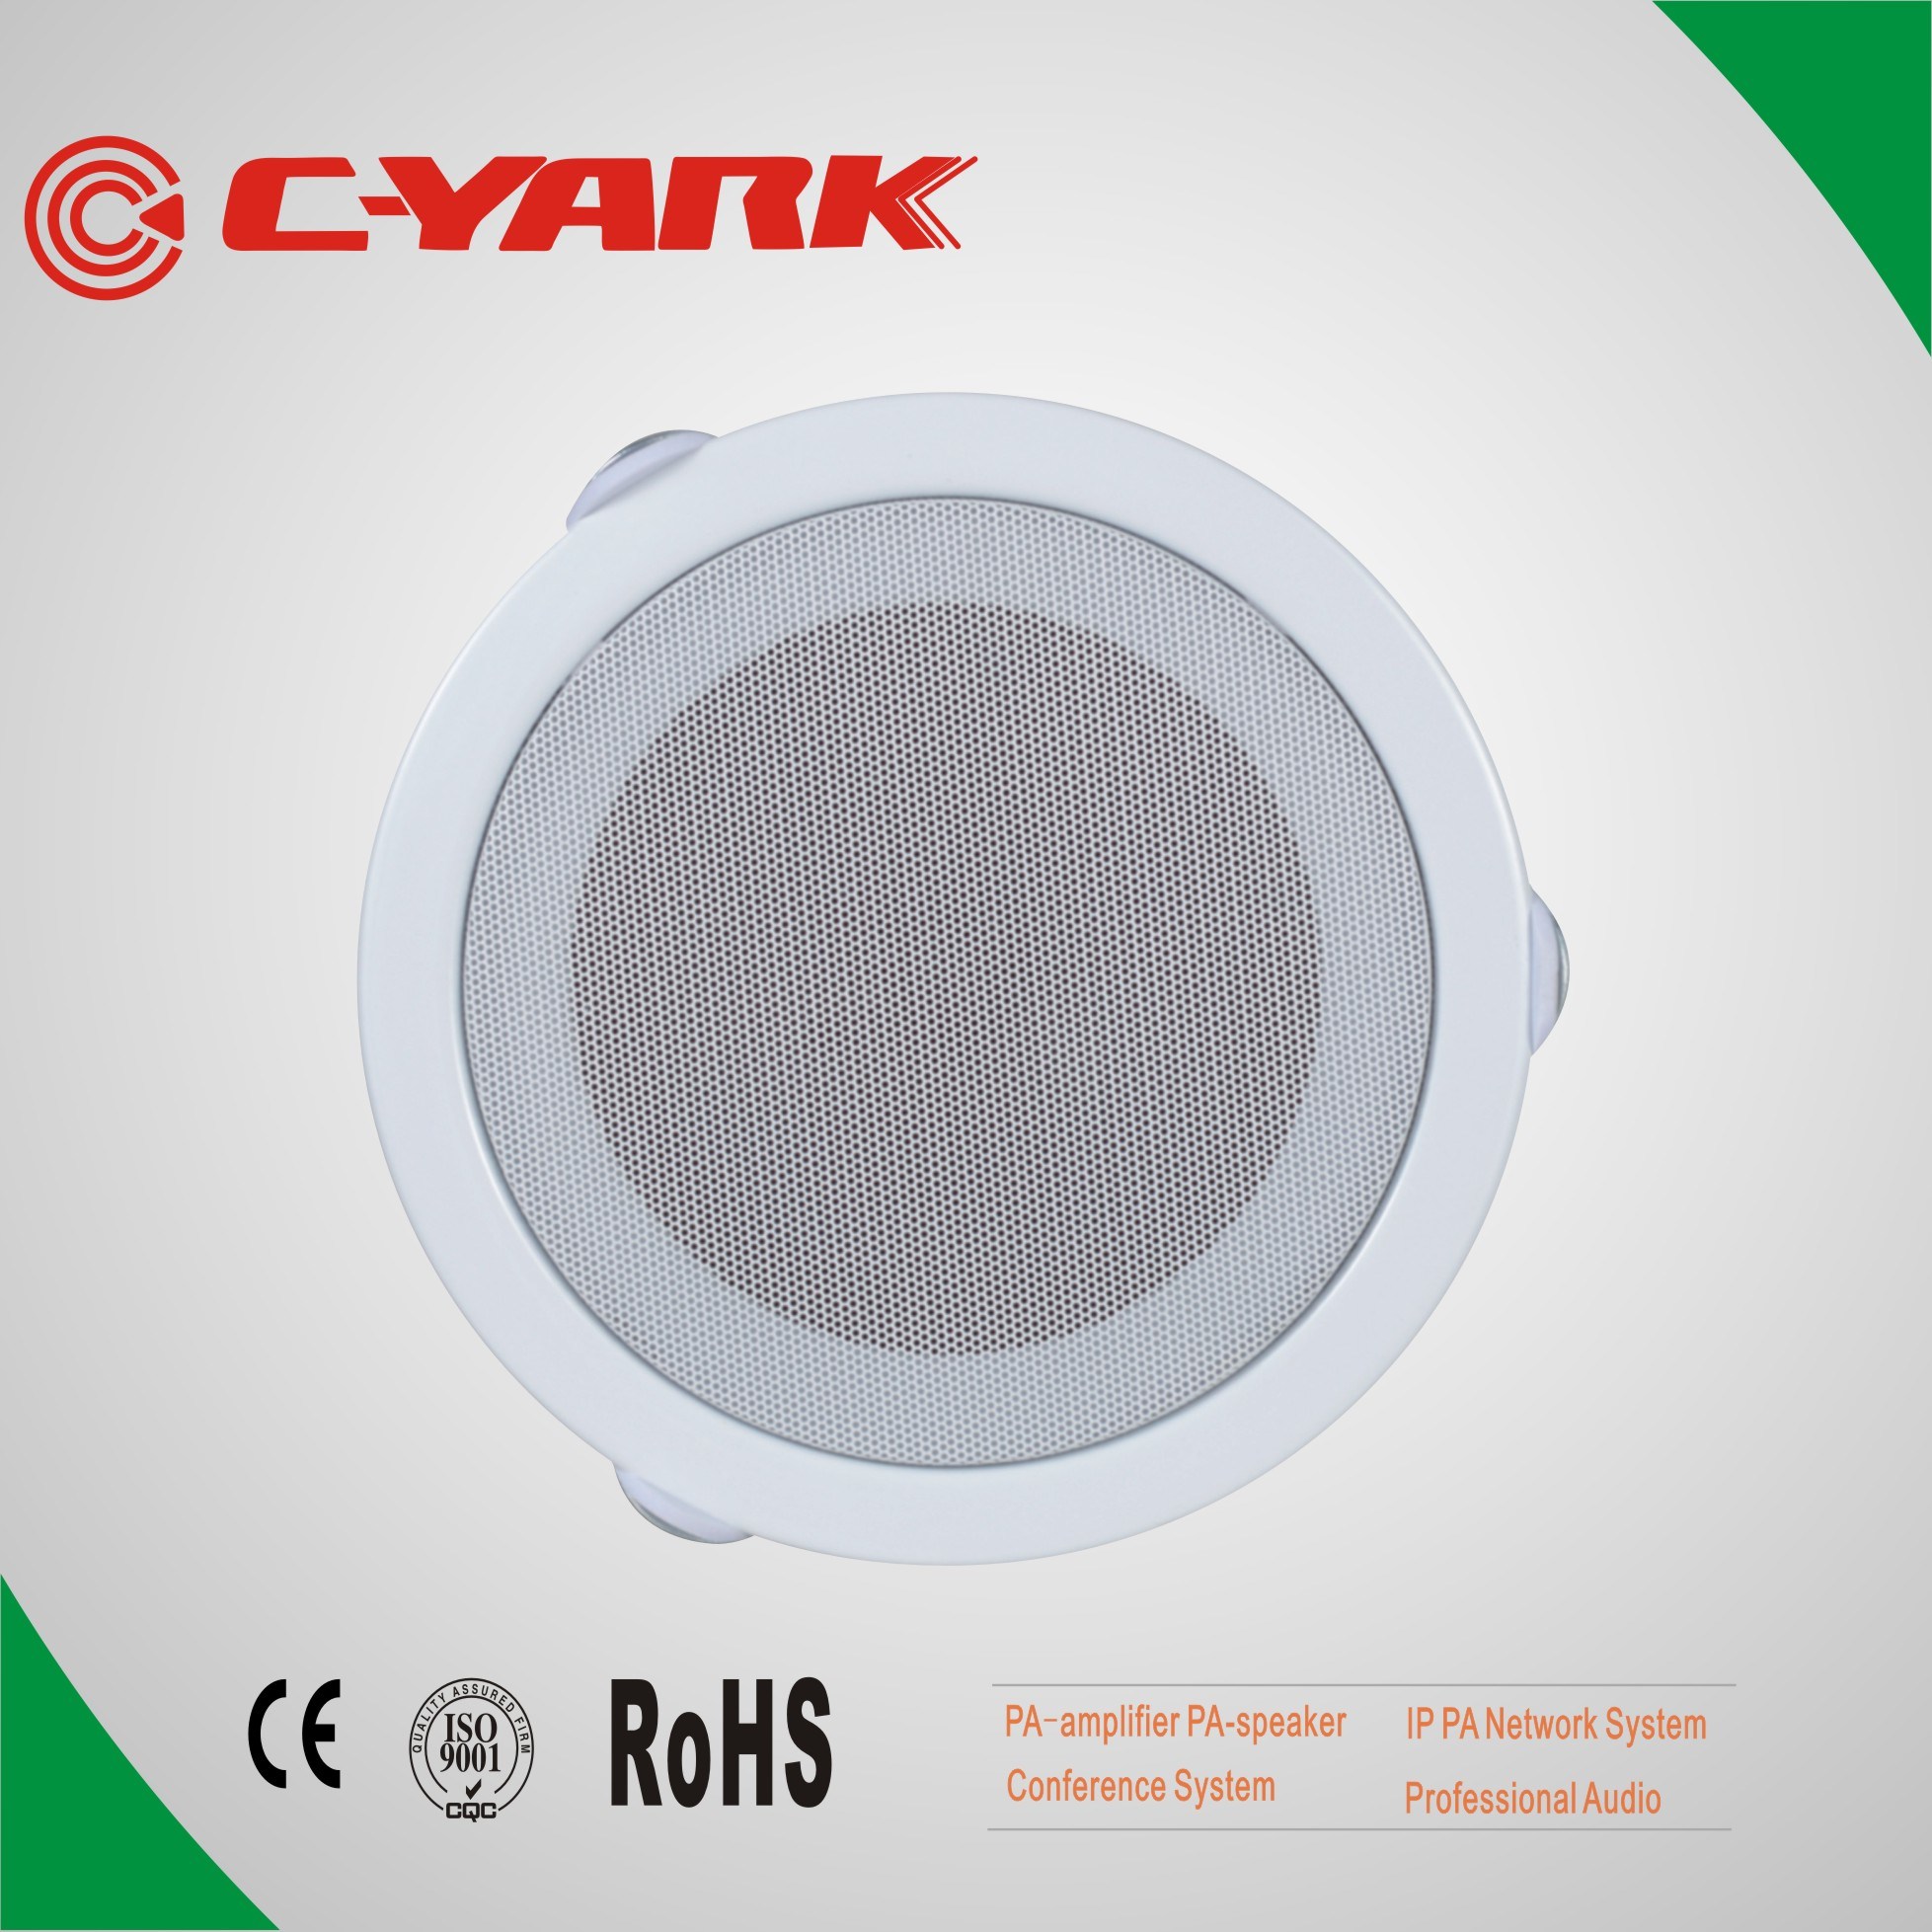 C-Yark High Tone 6W Ceiling Speaker with Voltage